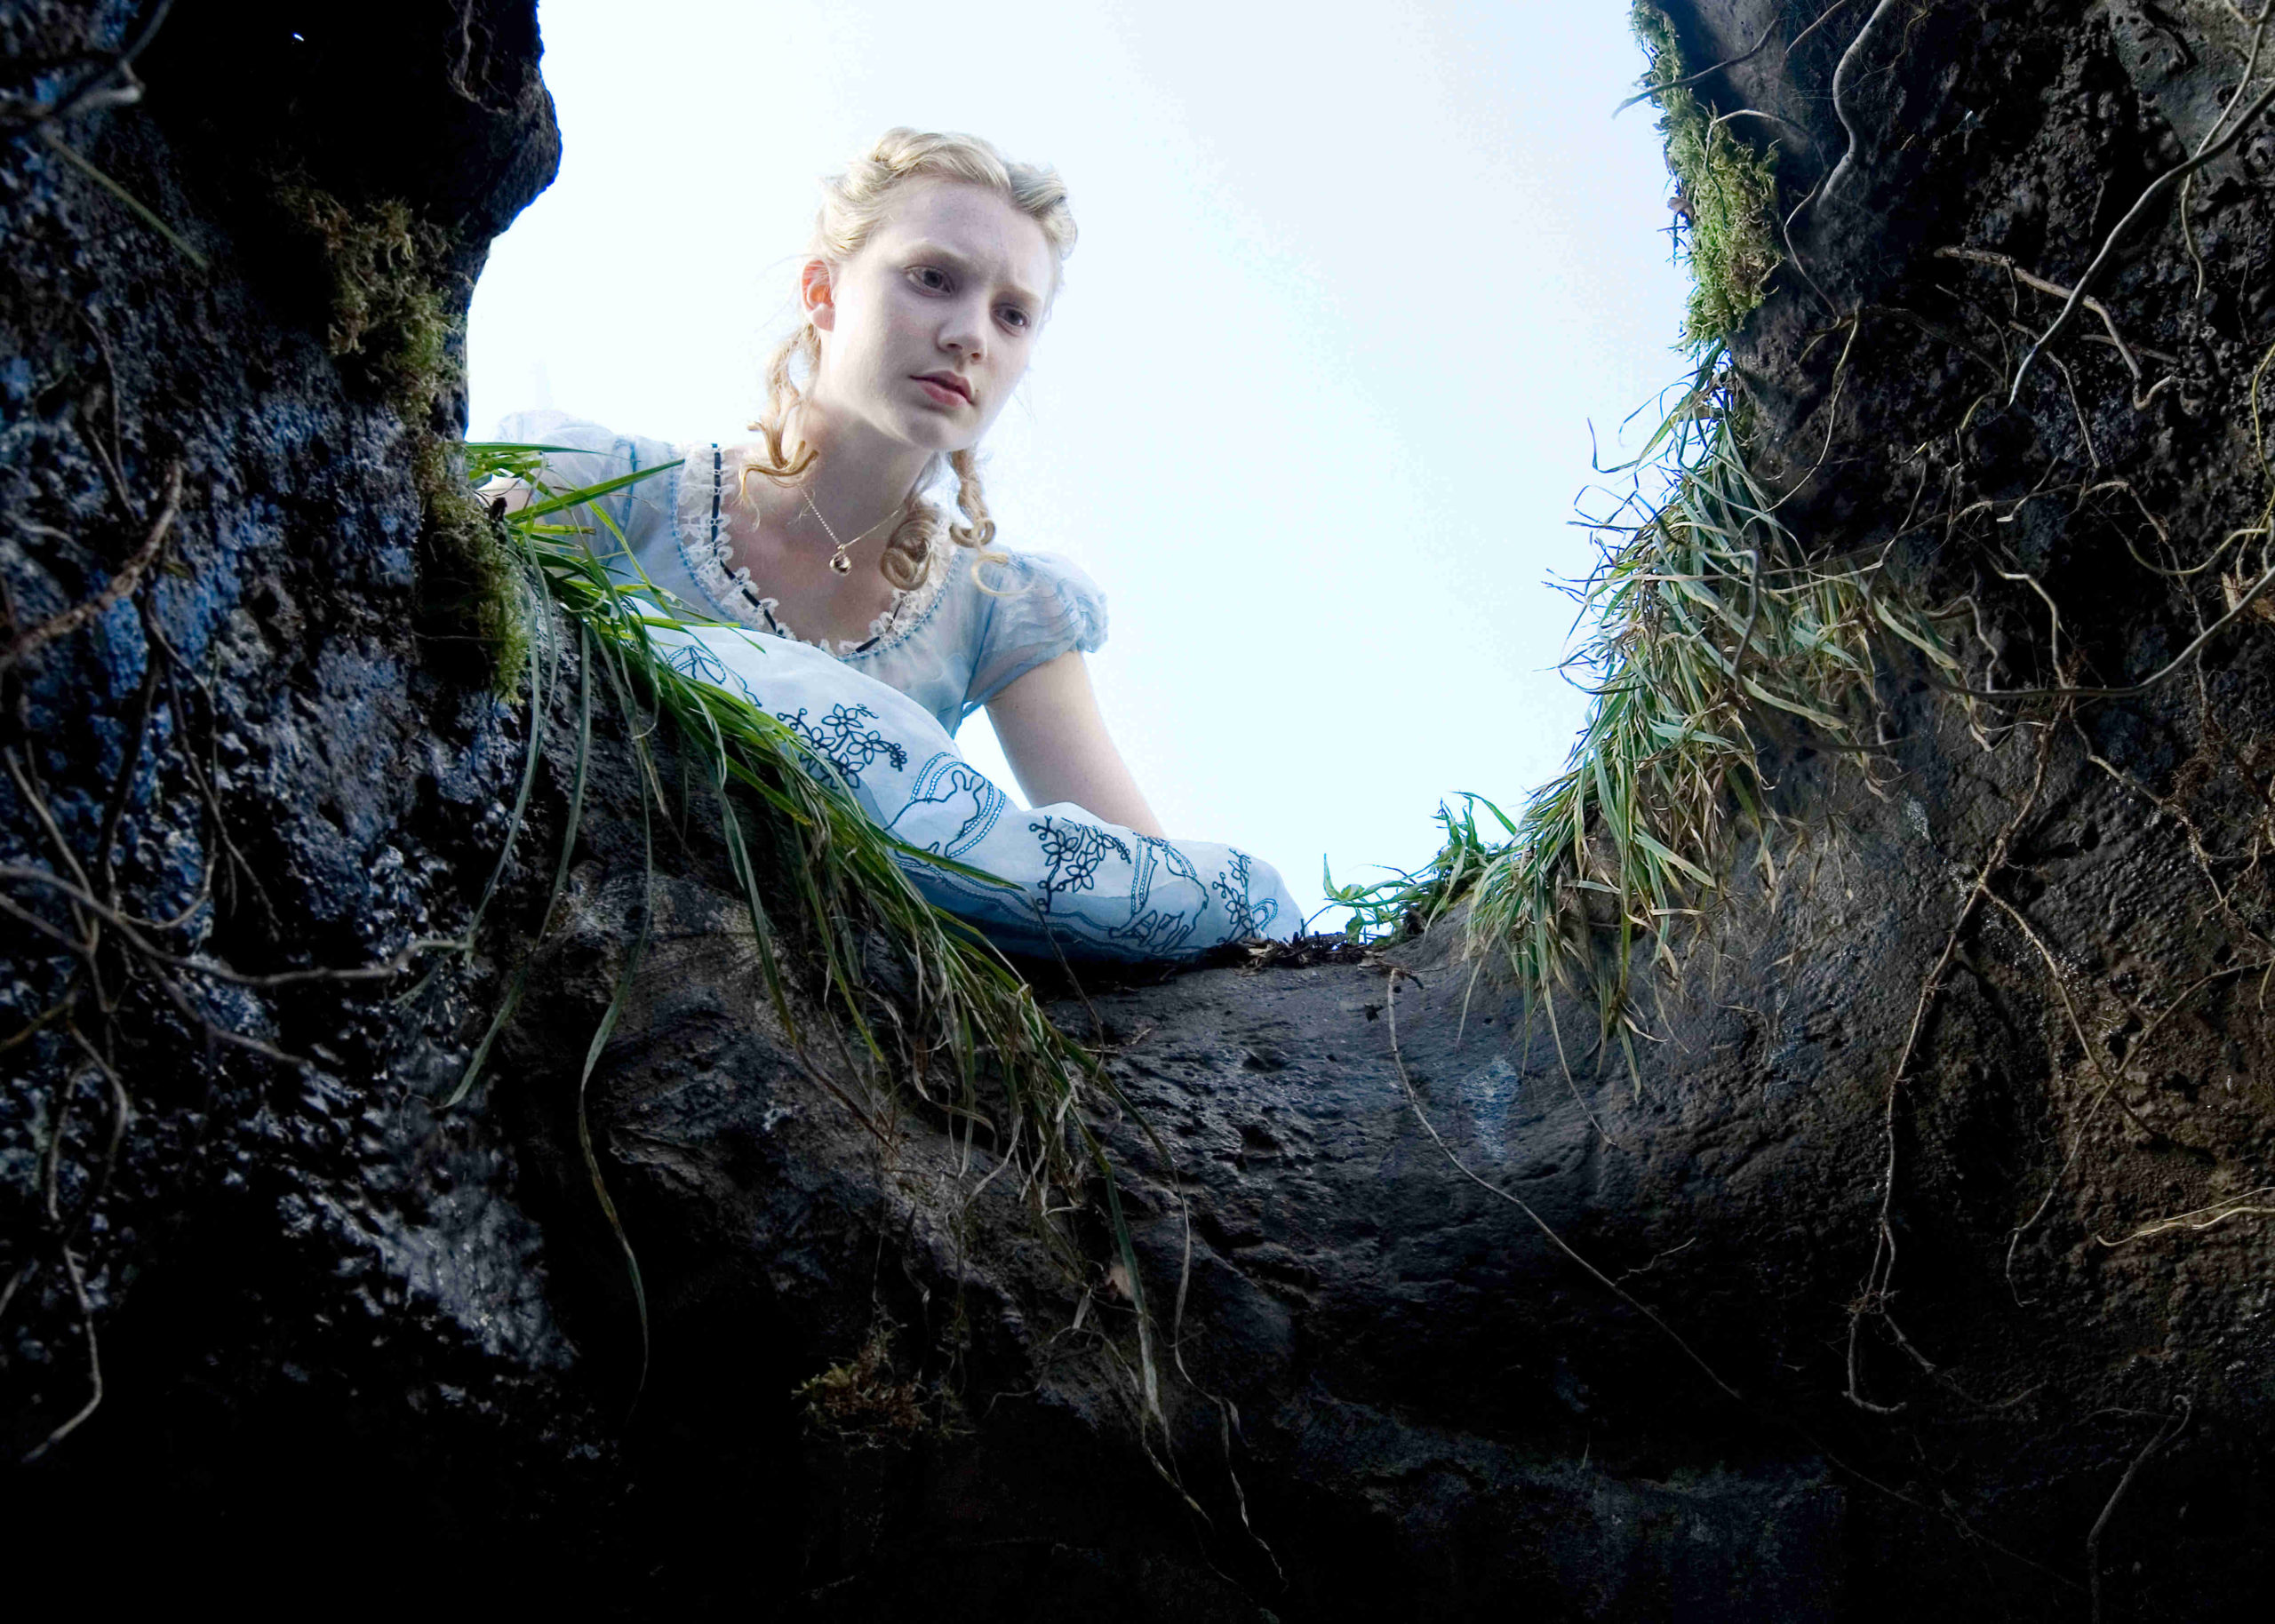 Alice In Wonderland (2010) - Movie  Reviews, Cast & Release Date -  BookMyShow